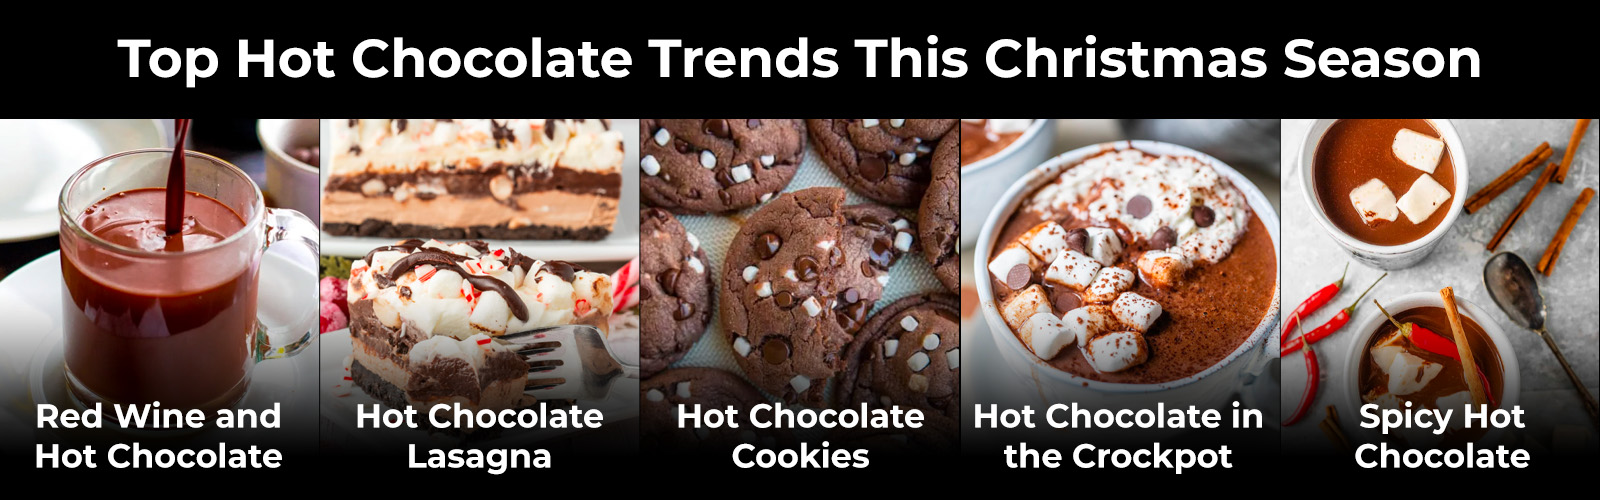 Top Hot Chocolate Trends This Season